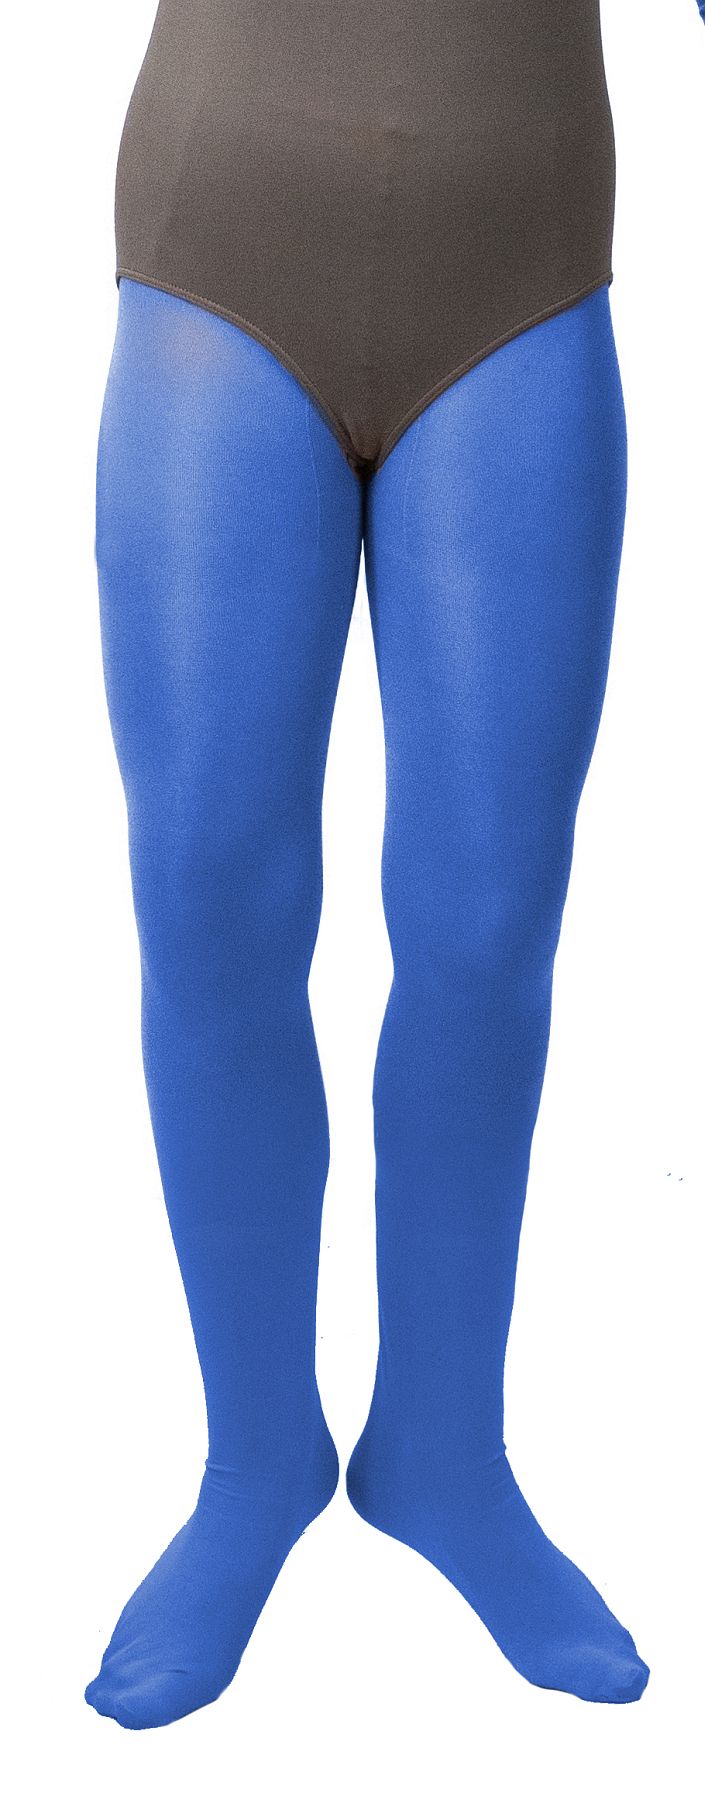 Opaque tights, blue